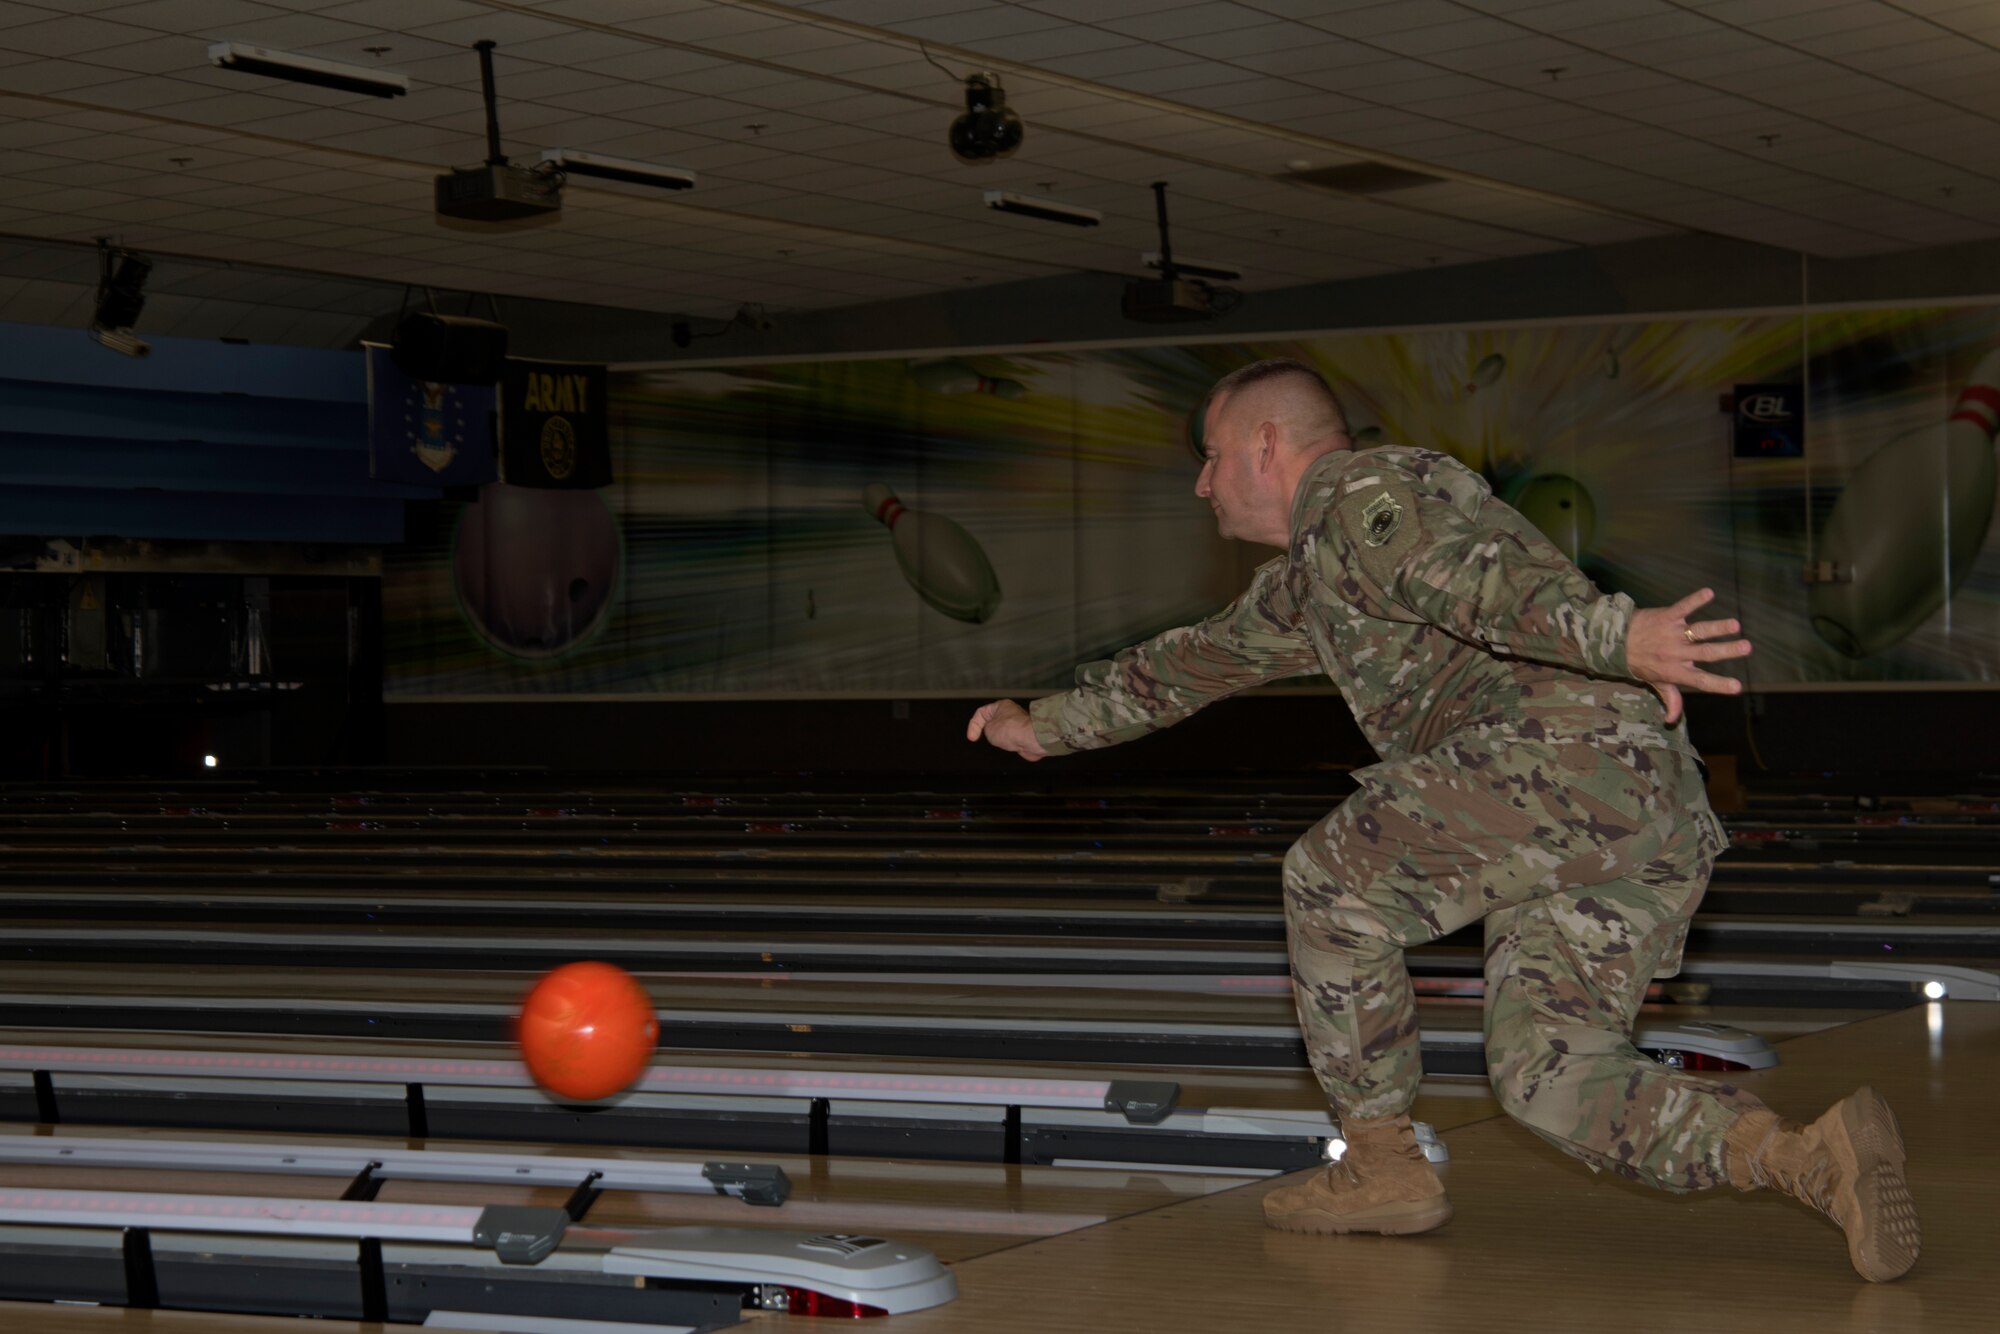 U.S. Air Force Chief Master Sgt. Jason Morehouse, 20th Fighter Wing command chief, plays a HyperBowling game at the 20th Force Support Squadron Shaw Lanes Bowling Center at Shaw Air Force Base, South Carolina, July 19, 2019.